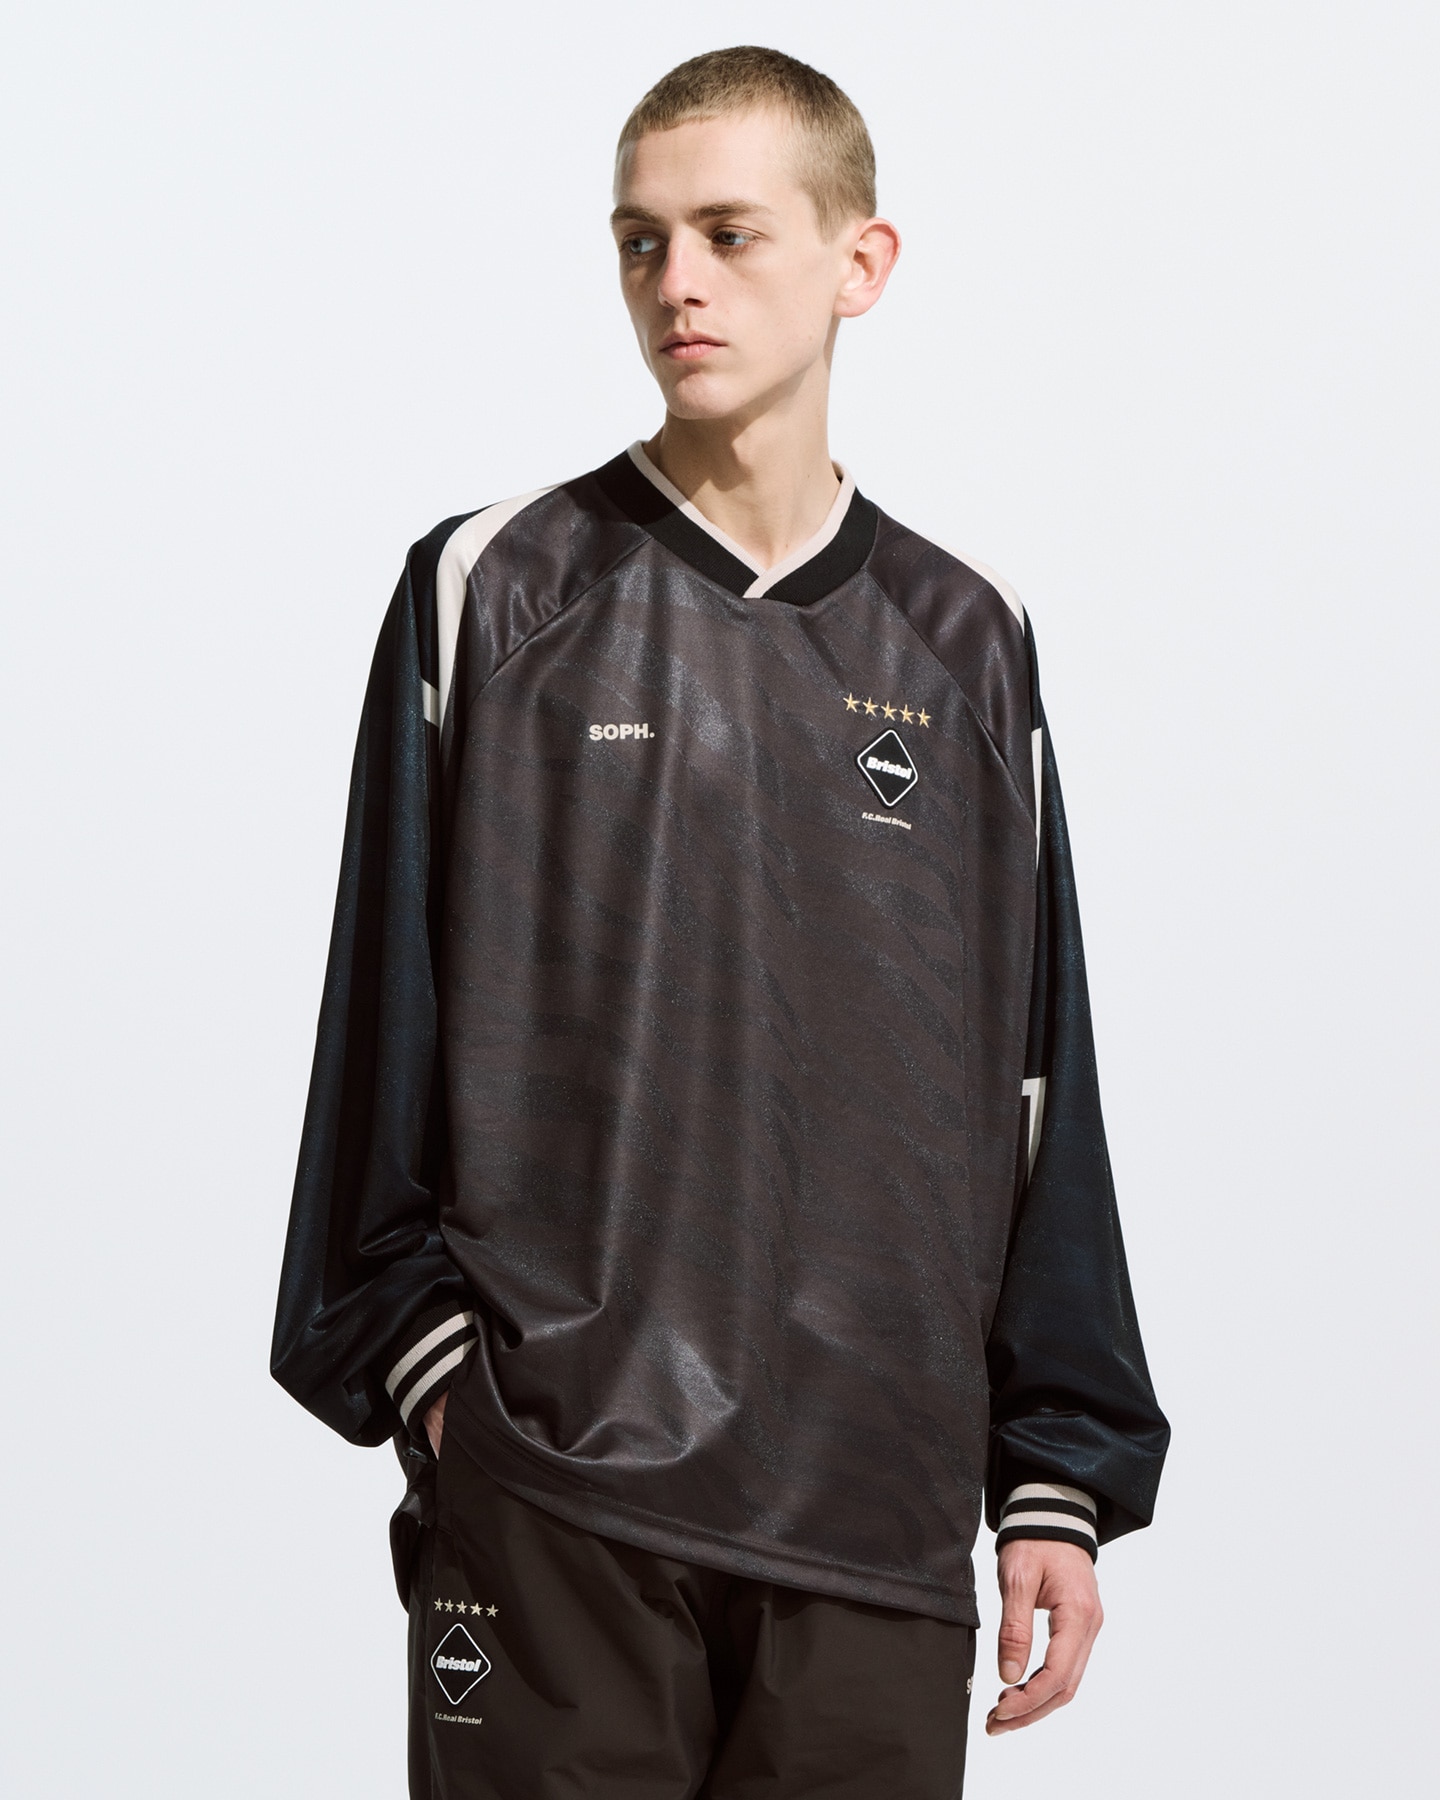 SOPH. | L/S OVERSIZED GAME SHIRT(S BROWN):